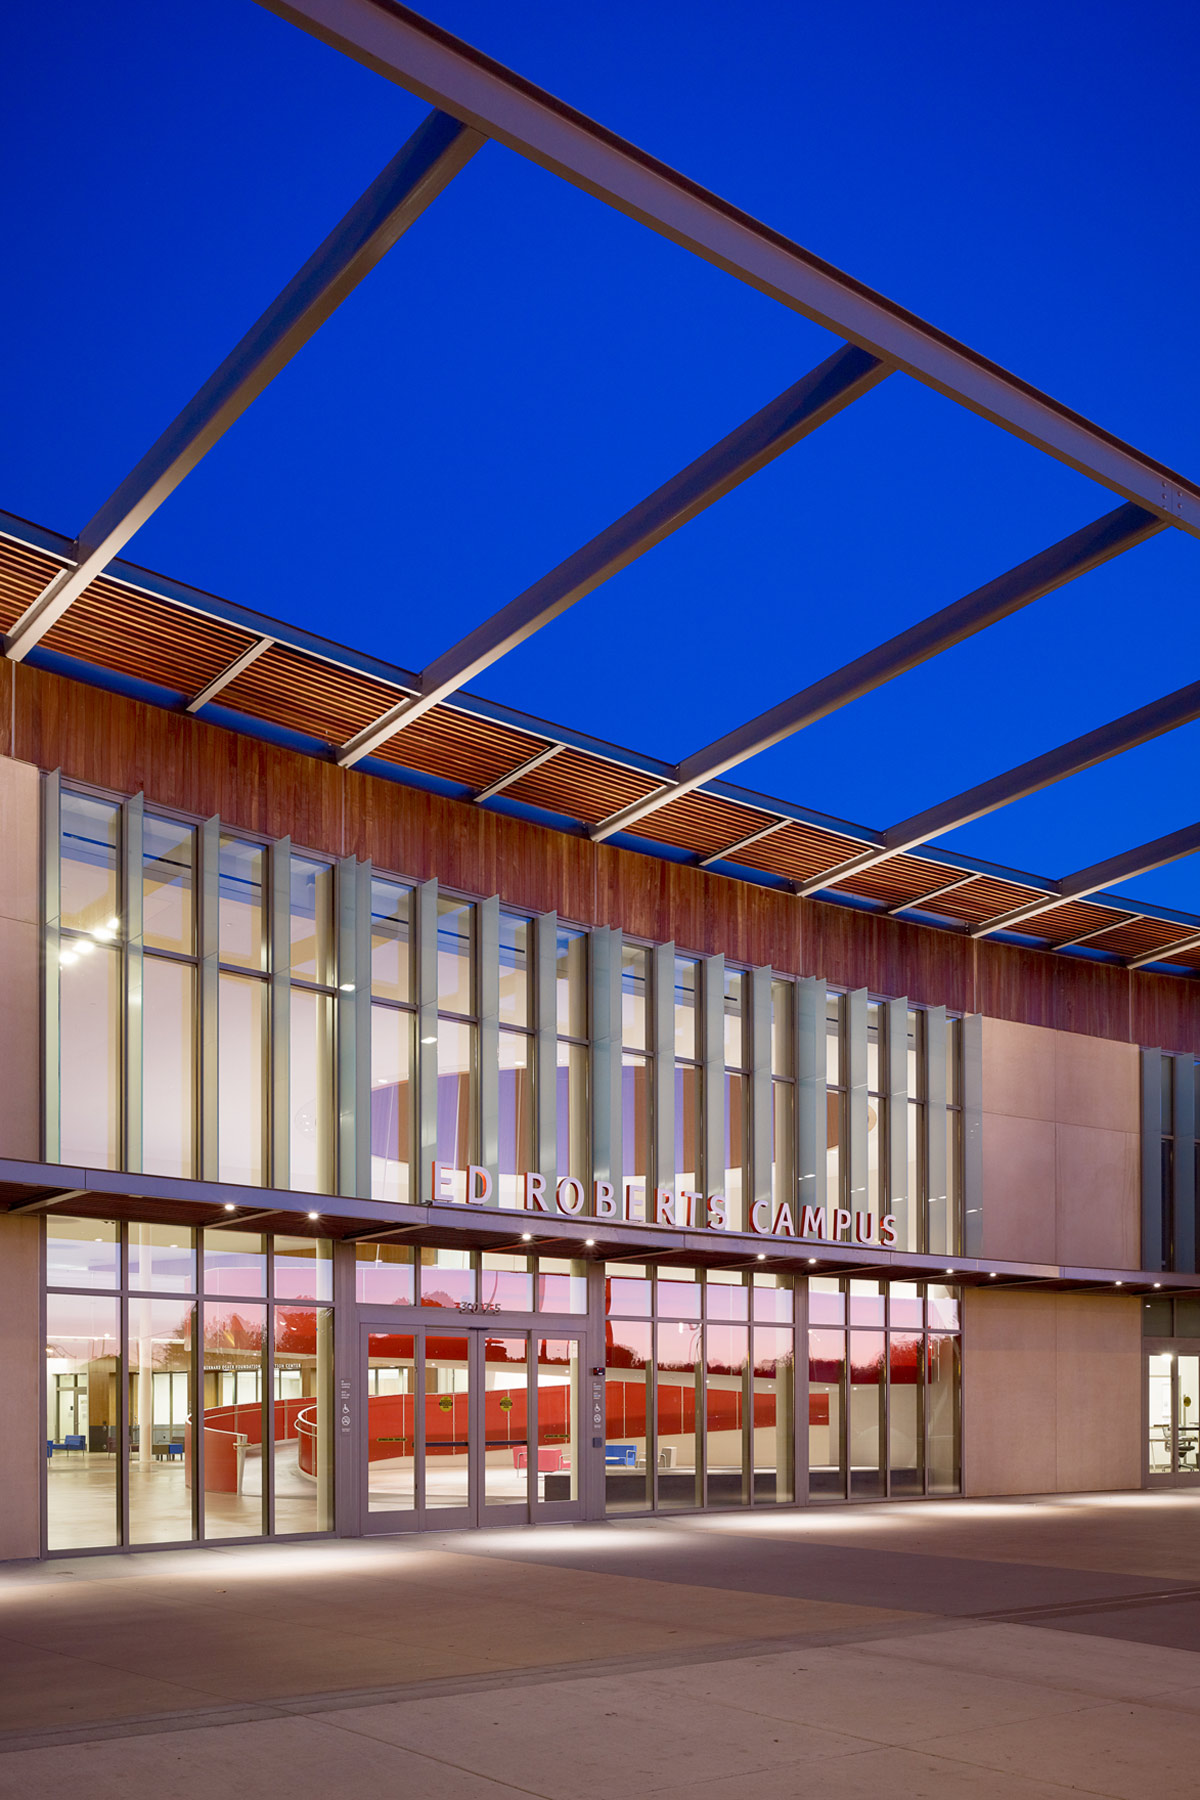 The Ed Roberts Campus is a nationally-recognized model of universal design in the San Francisco Bay Area, exemplifying design addressing a social justice issue.